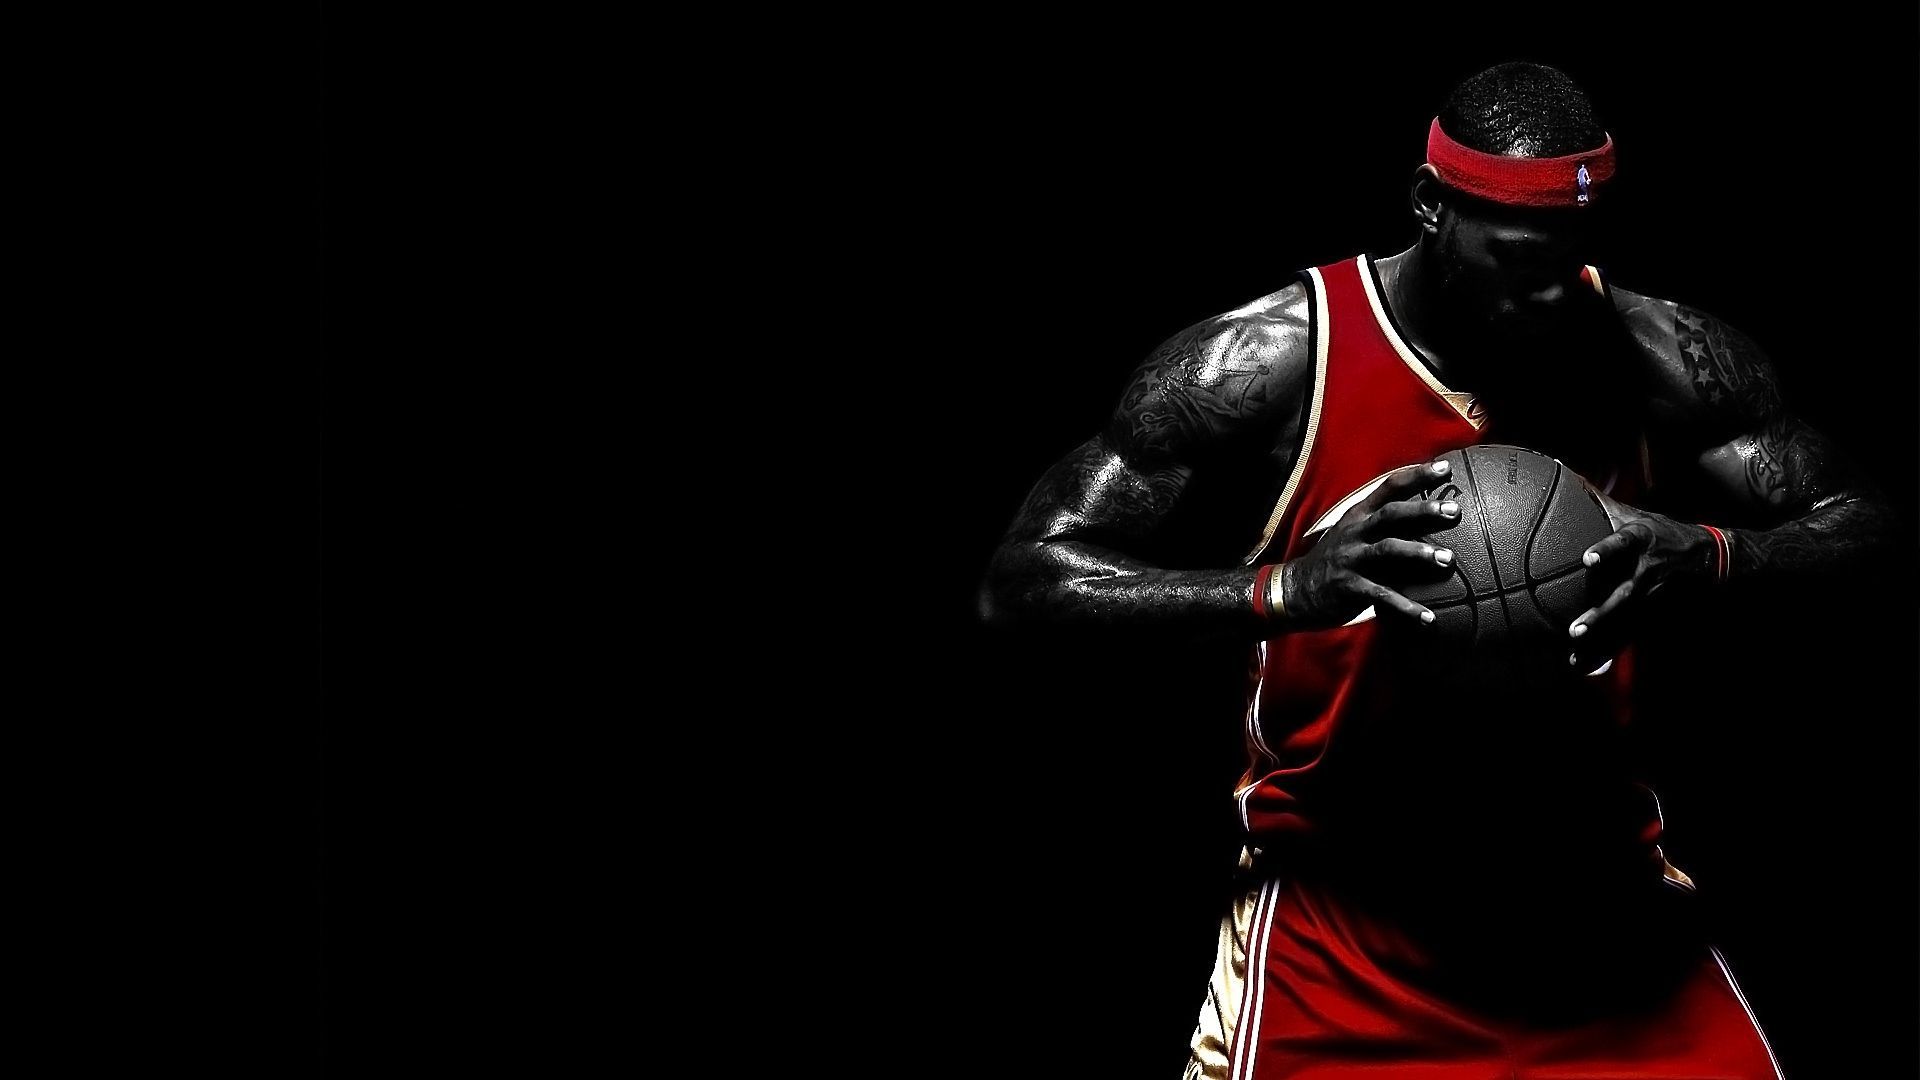 Top Basketball Hd Wallpapers 1080p Images for Pinterest